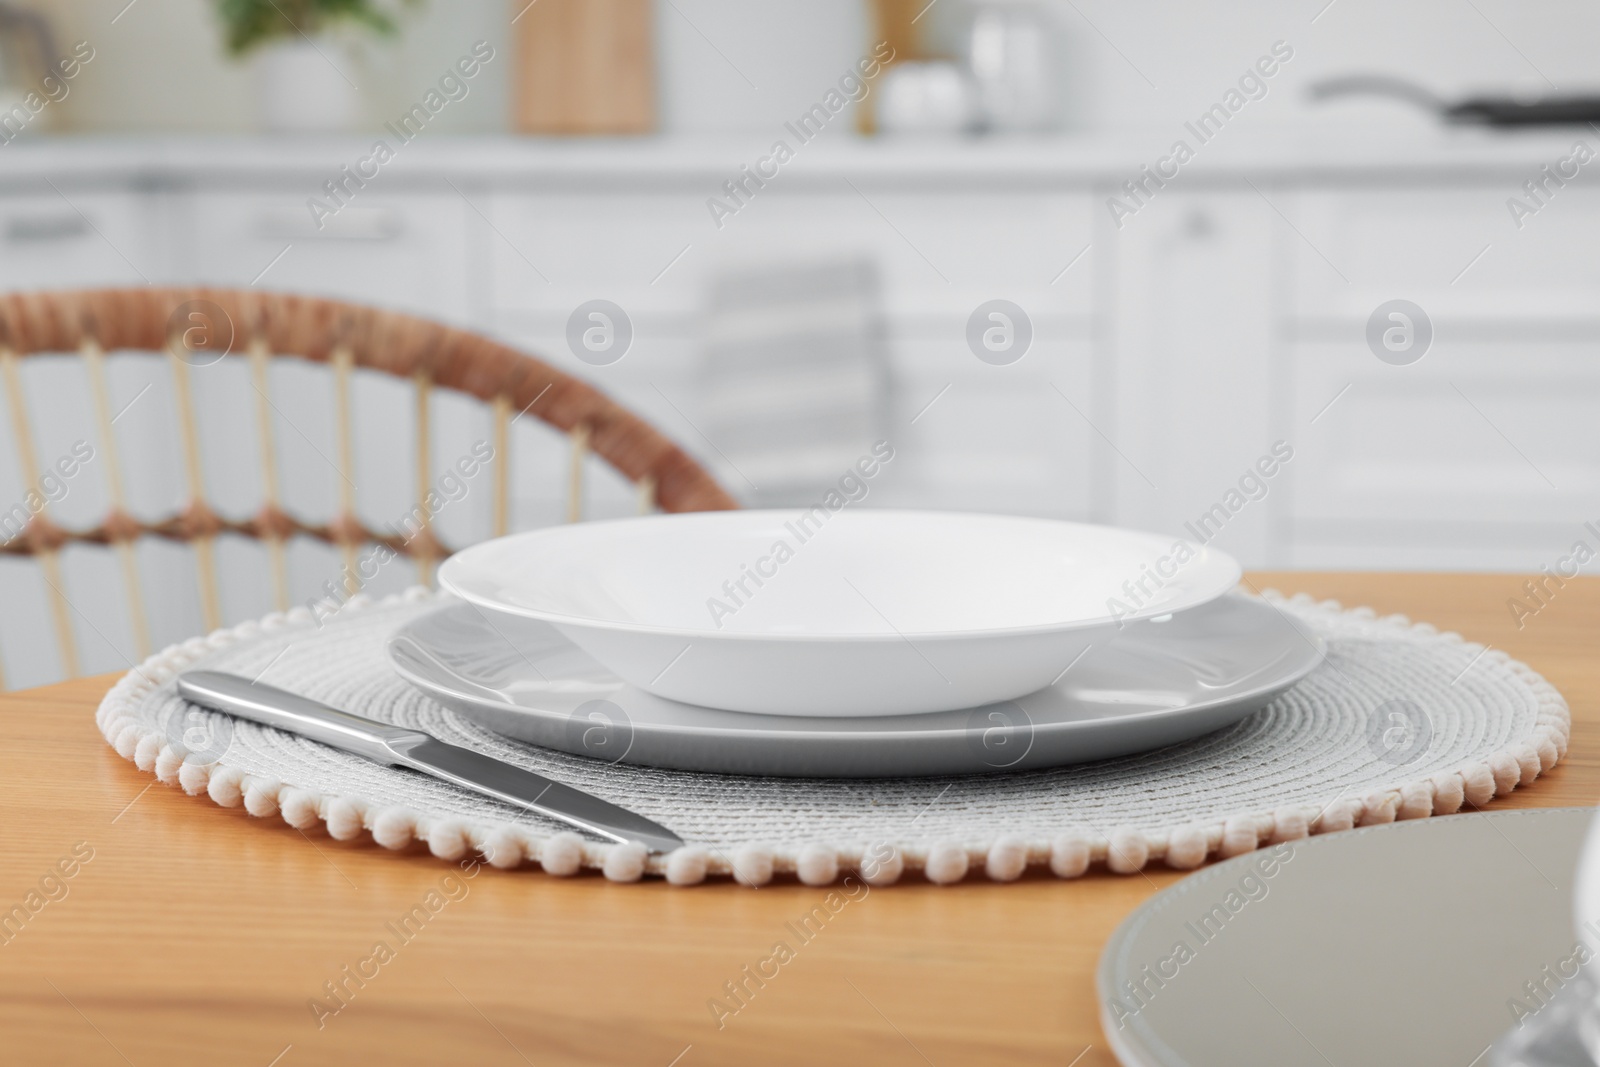 Photo of Stylish ceramic plates and cutlery on wooden table in kitchen